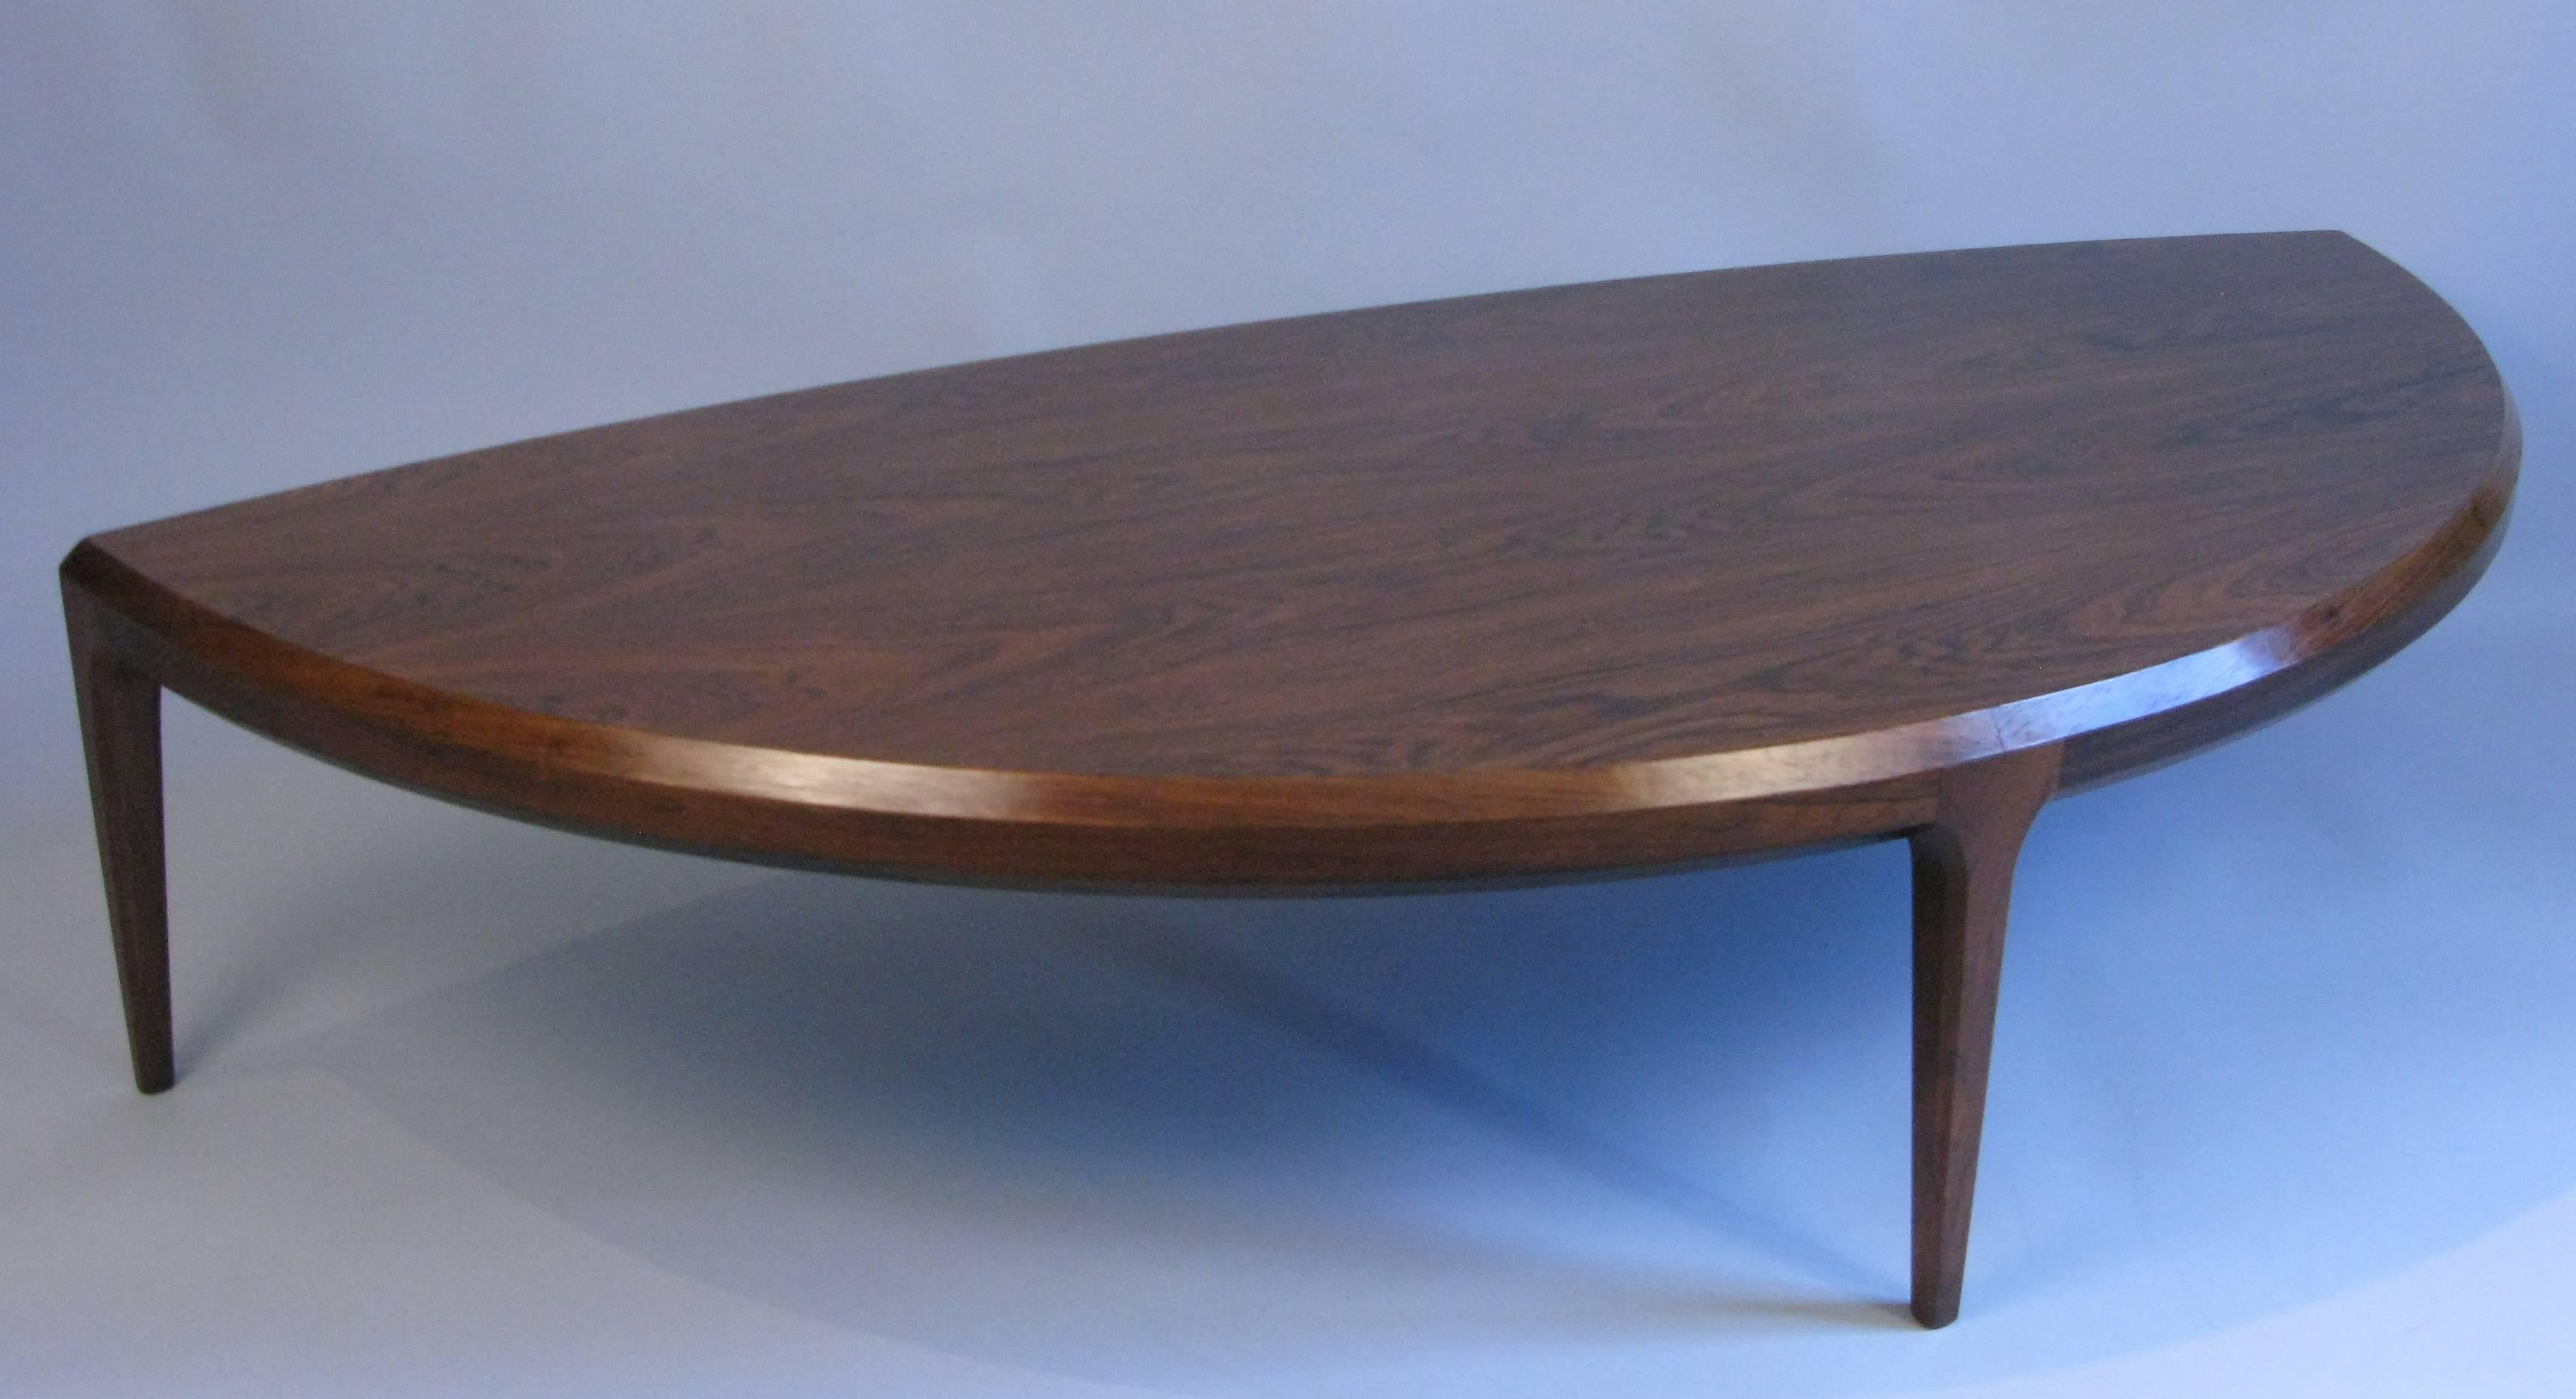 Very stylish Danish rosewood coffee table designed by Johannes Andersen.